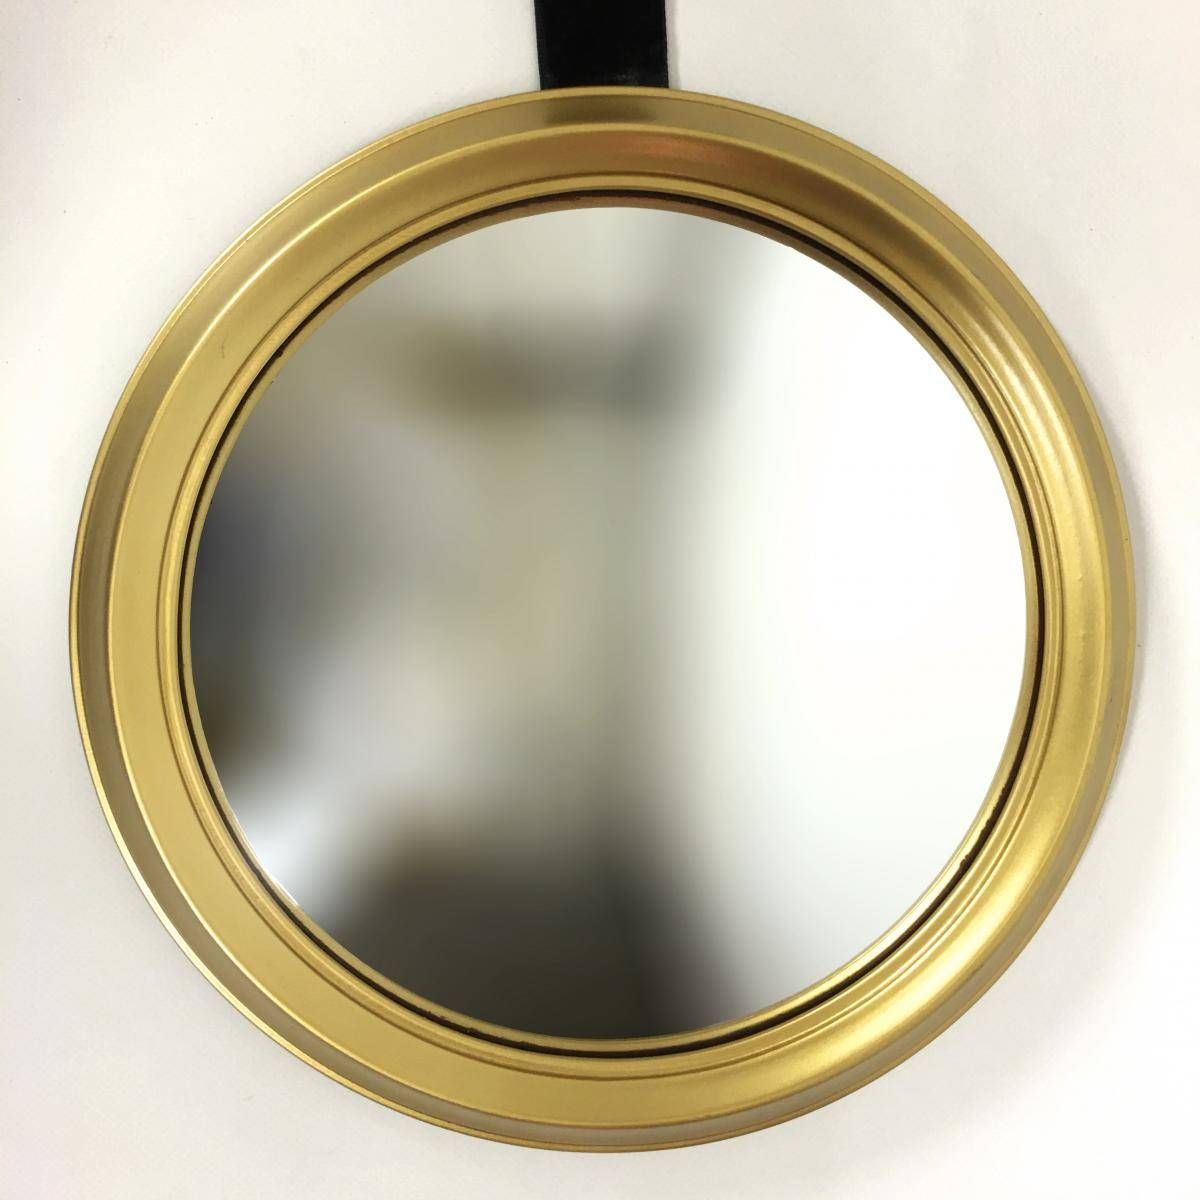 Vintage French Round Convex Mirrorartilux, 1960s For Sale At With Regard To Round Convex Mirrors (View 25 of 25)